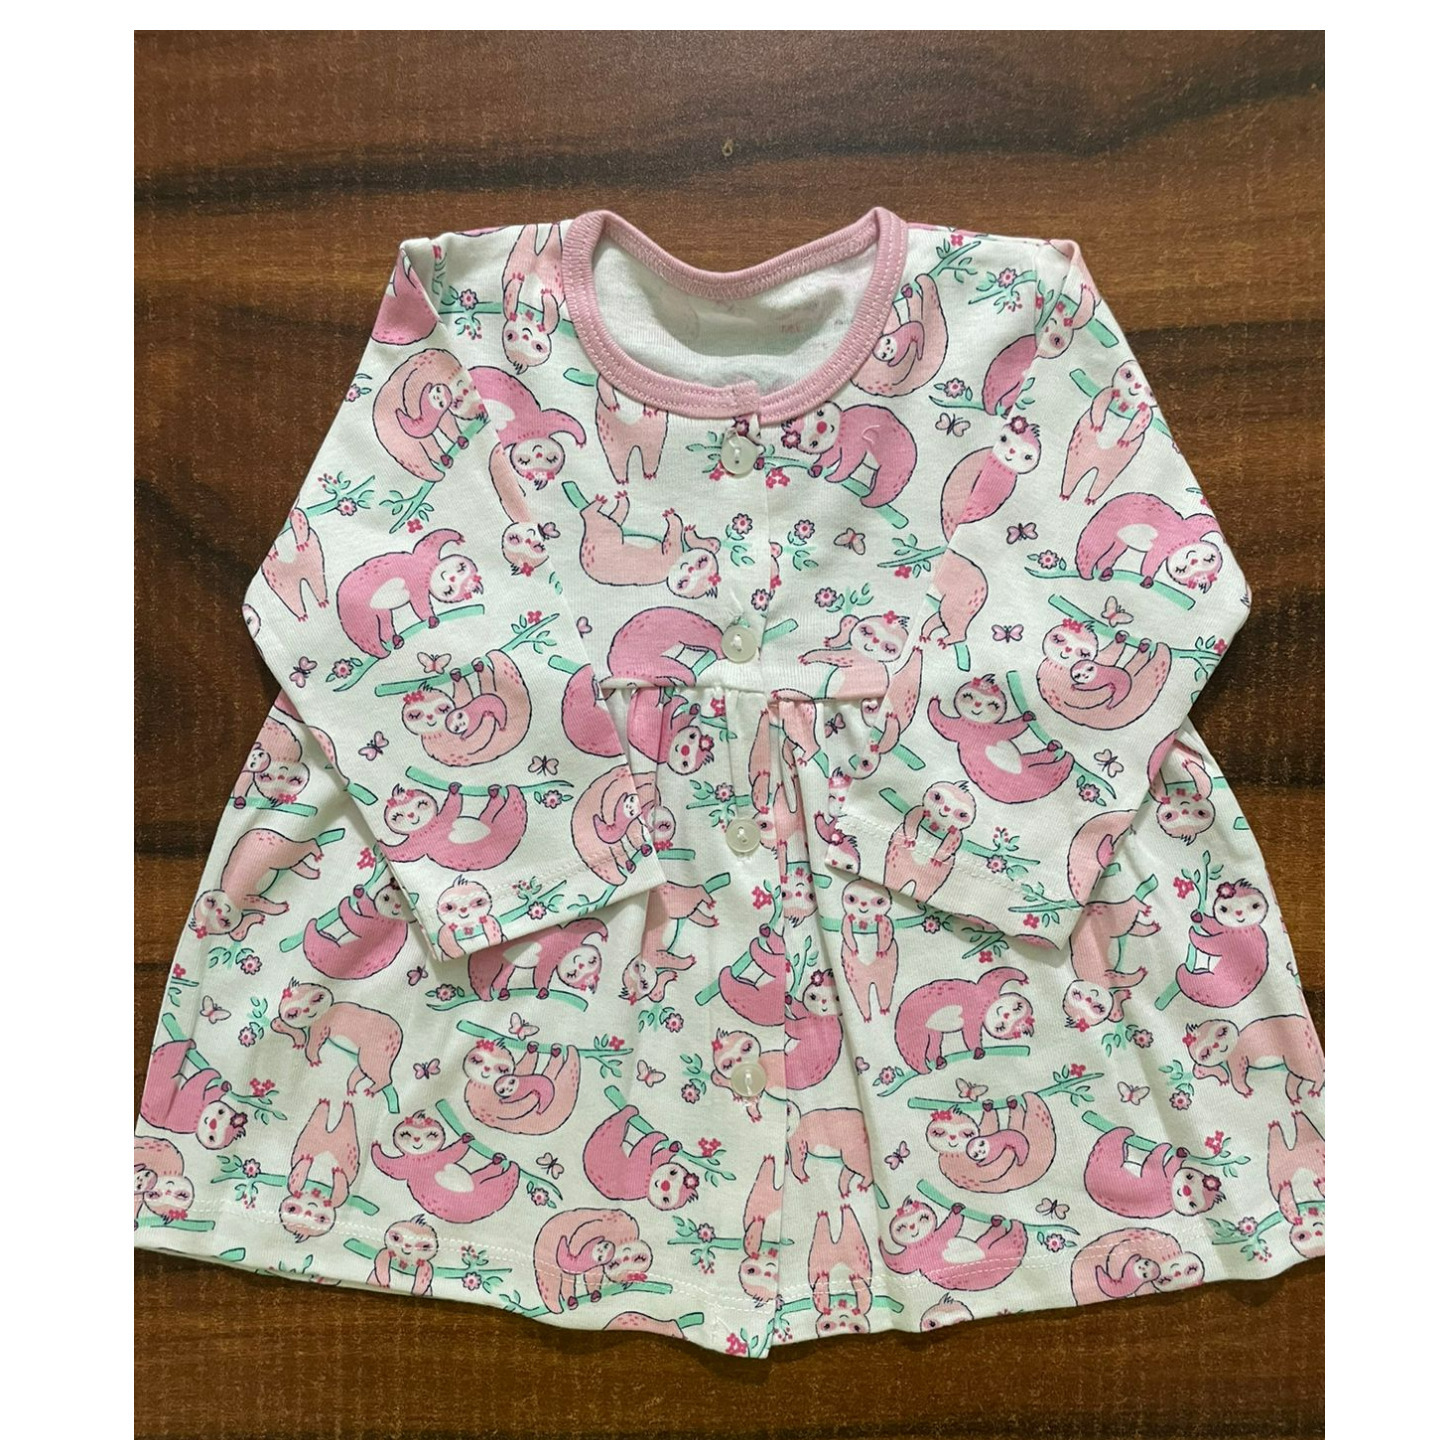 Precious One Bow Shorts Made in India 18-24 Months